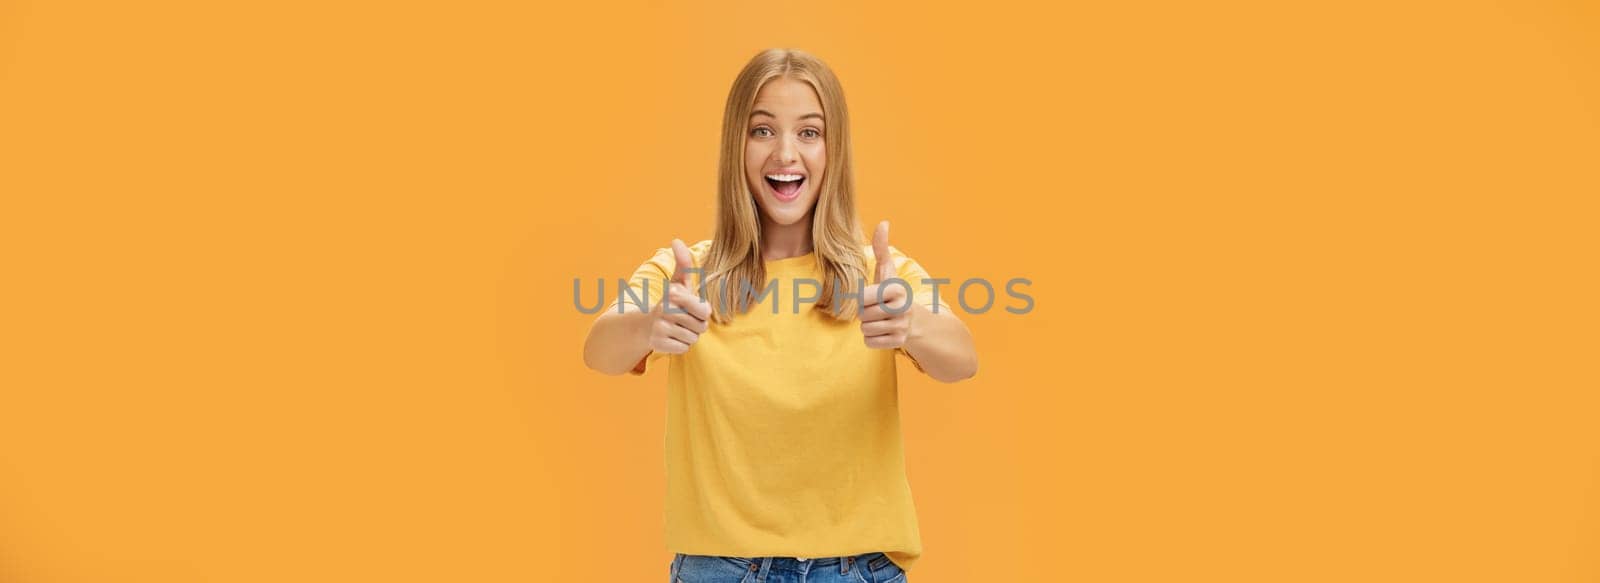 Woman supports with raised thumbs up and amused cheerful smile showing positive attitude expressing like on concept or idea giving approval posing happy and delighted against orange background. Lifestyle.